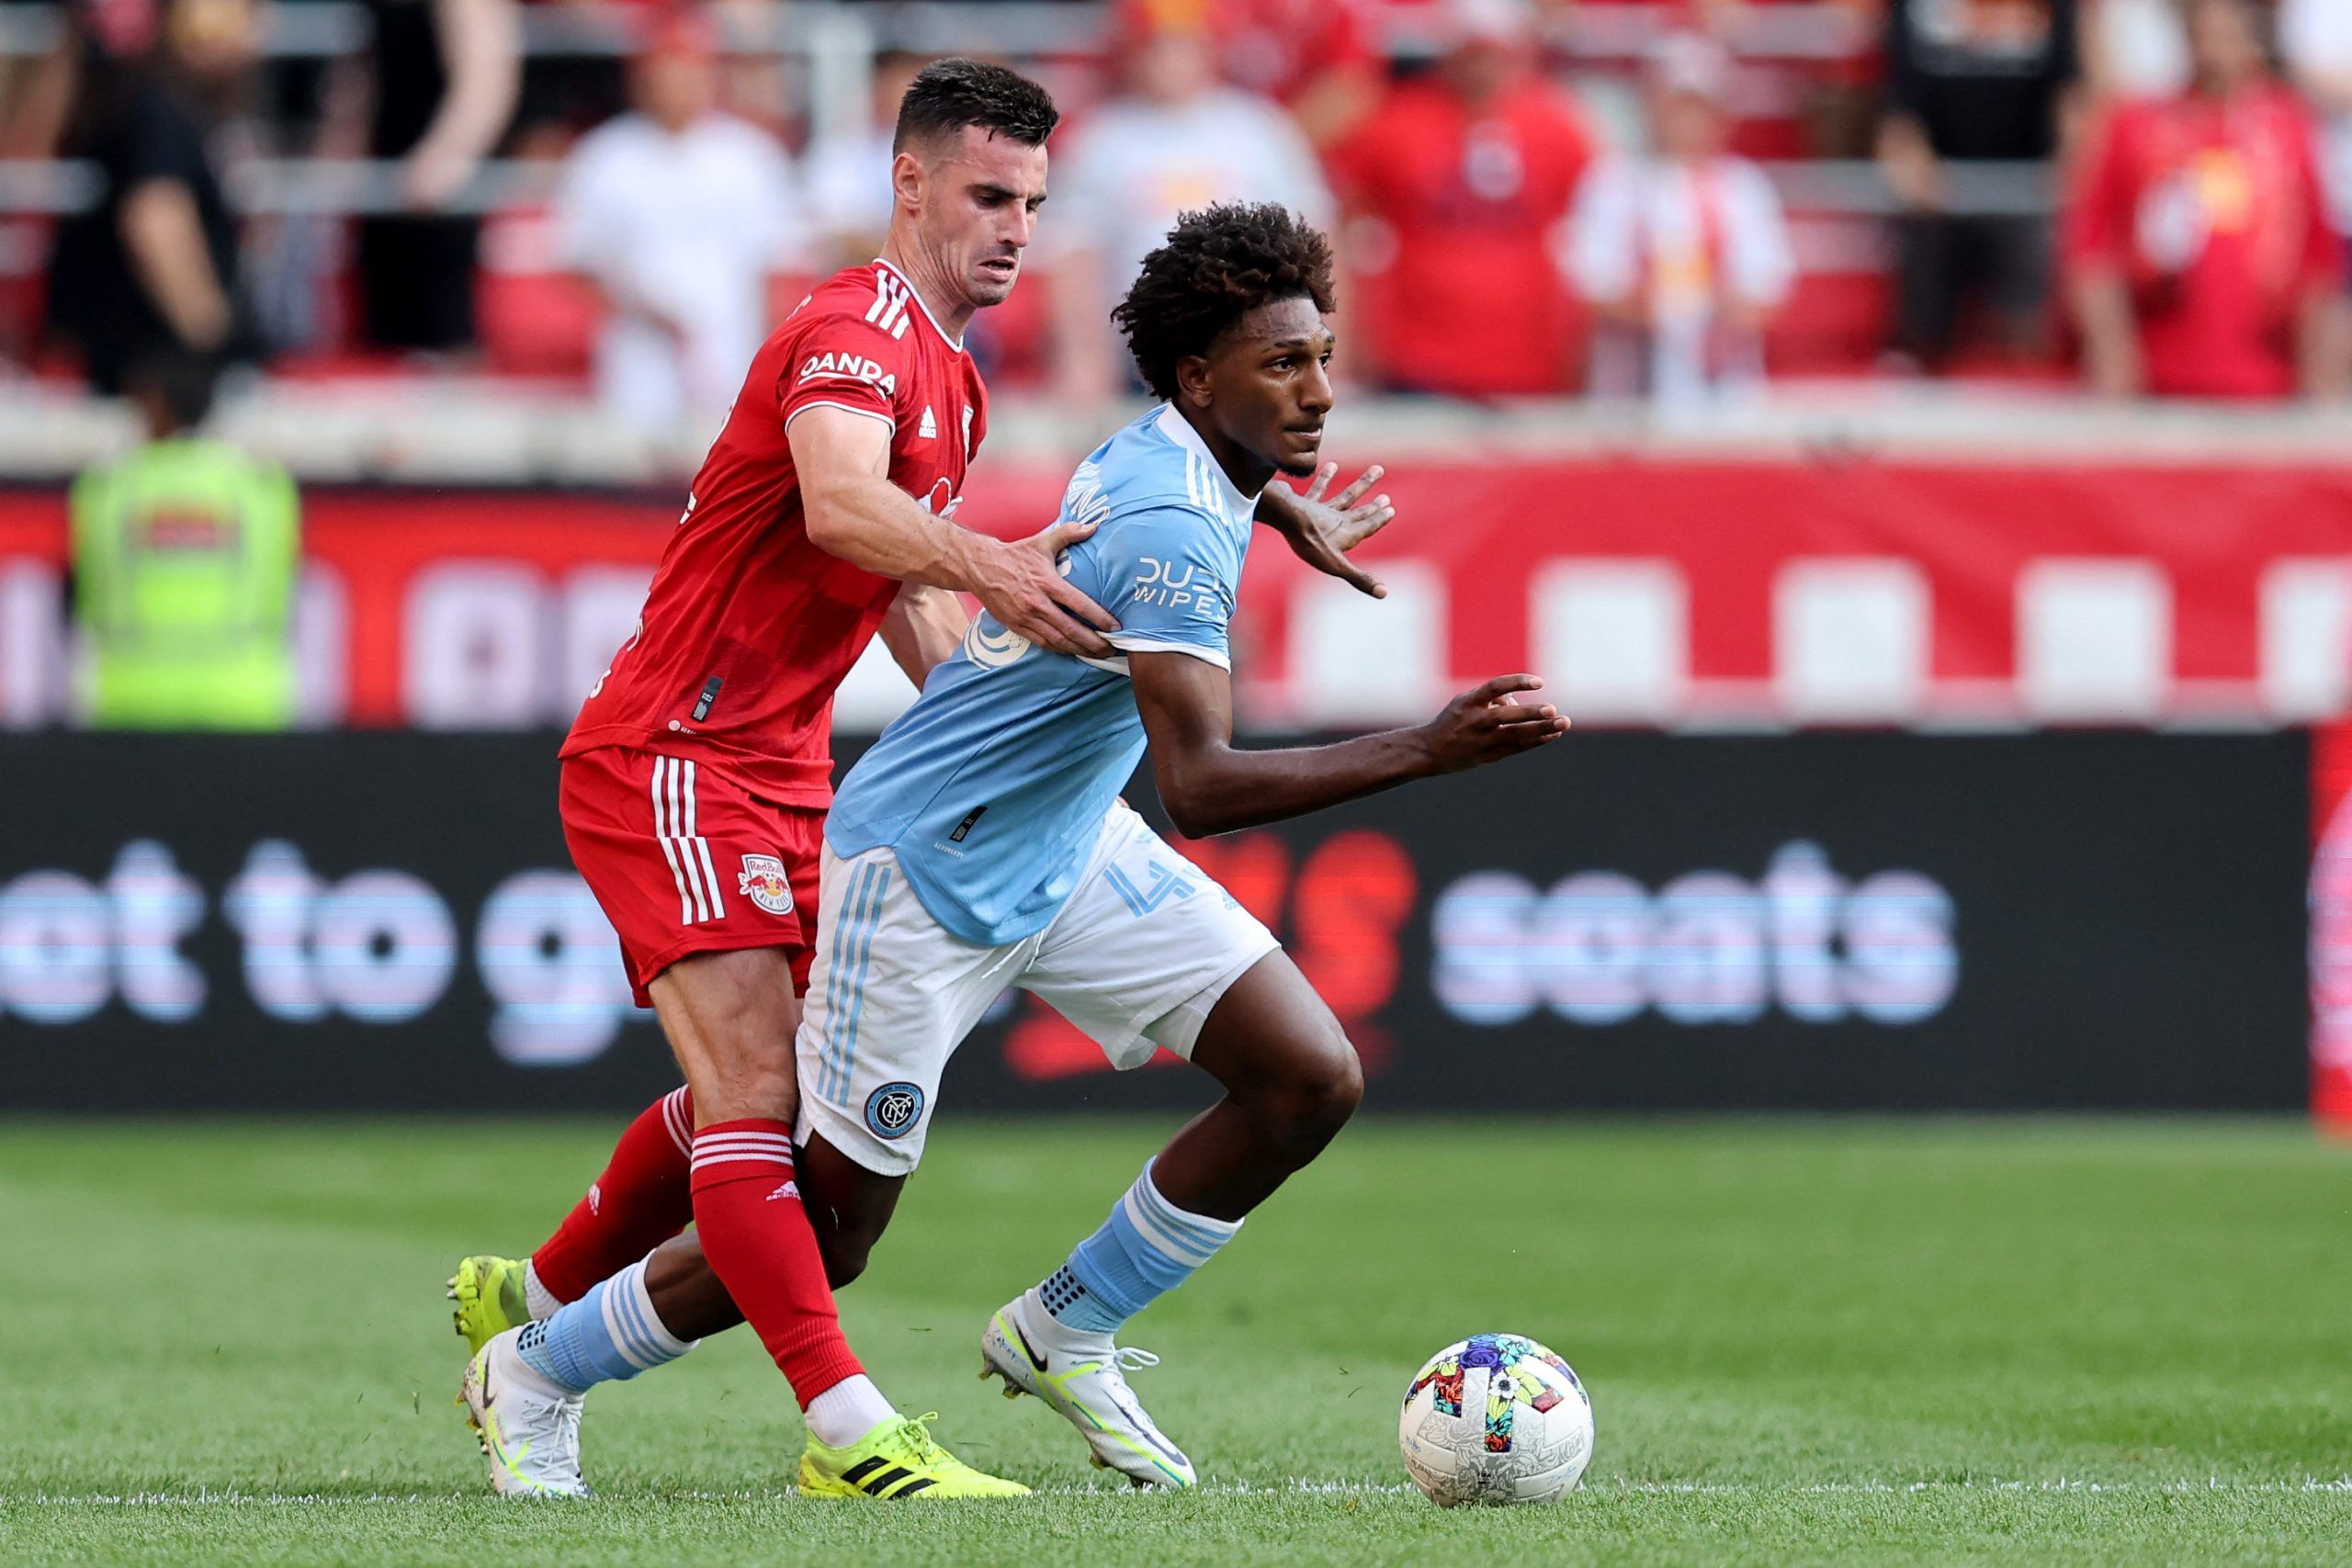 Jul 17, 2022; Harrison, New Jersey, USA; New York Red Bulls defender Dylan Nealis (12) and New York City forward Talles Magno (43) fight for the ball during the second half at Red Bull Arena. Mandatory Credit: Brad Penner-USA TODAY Sports